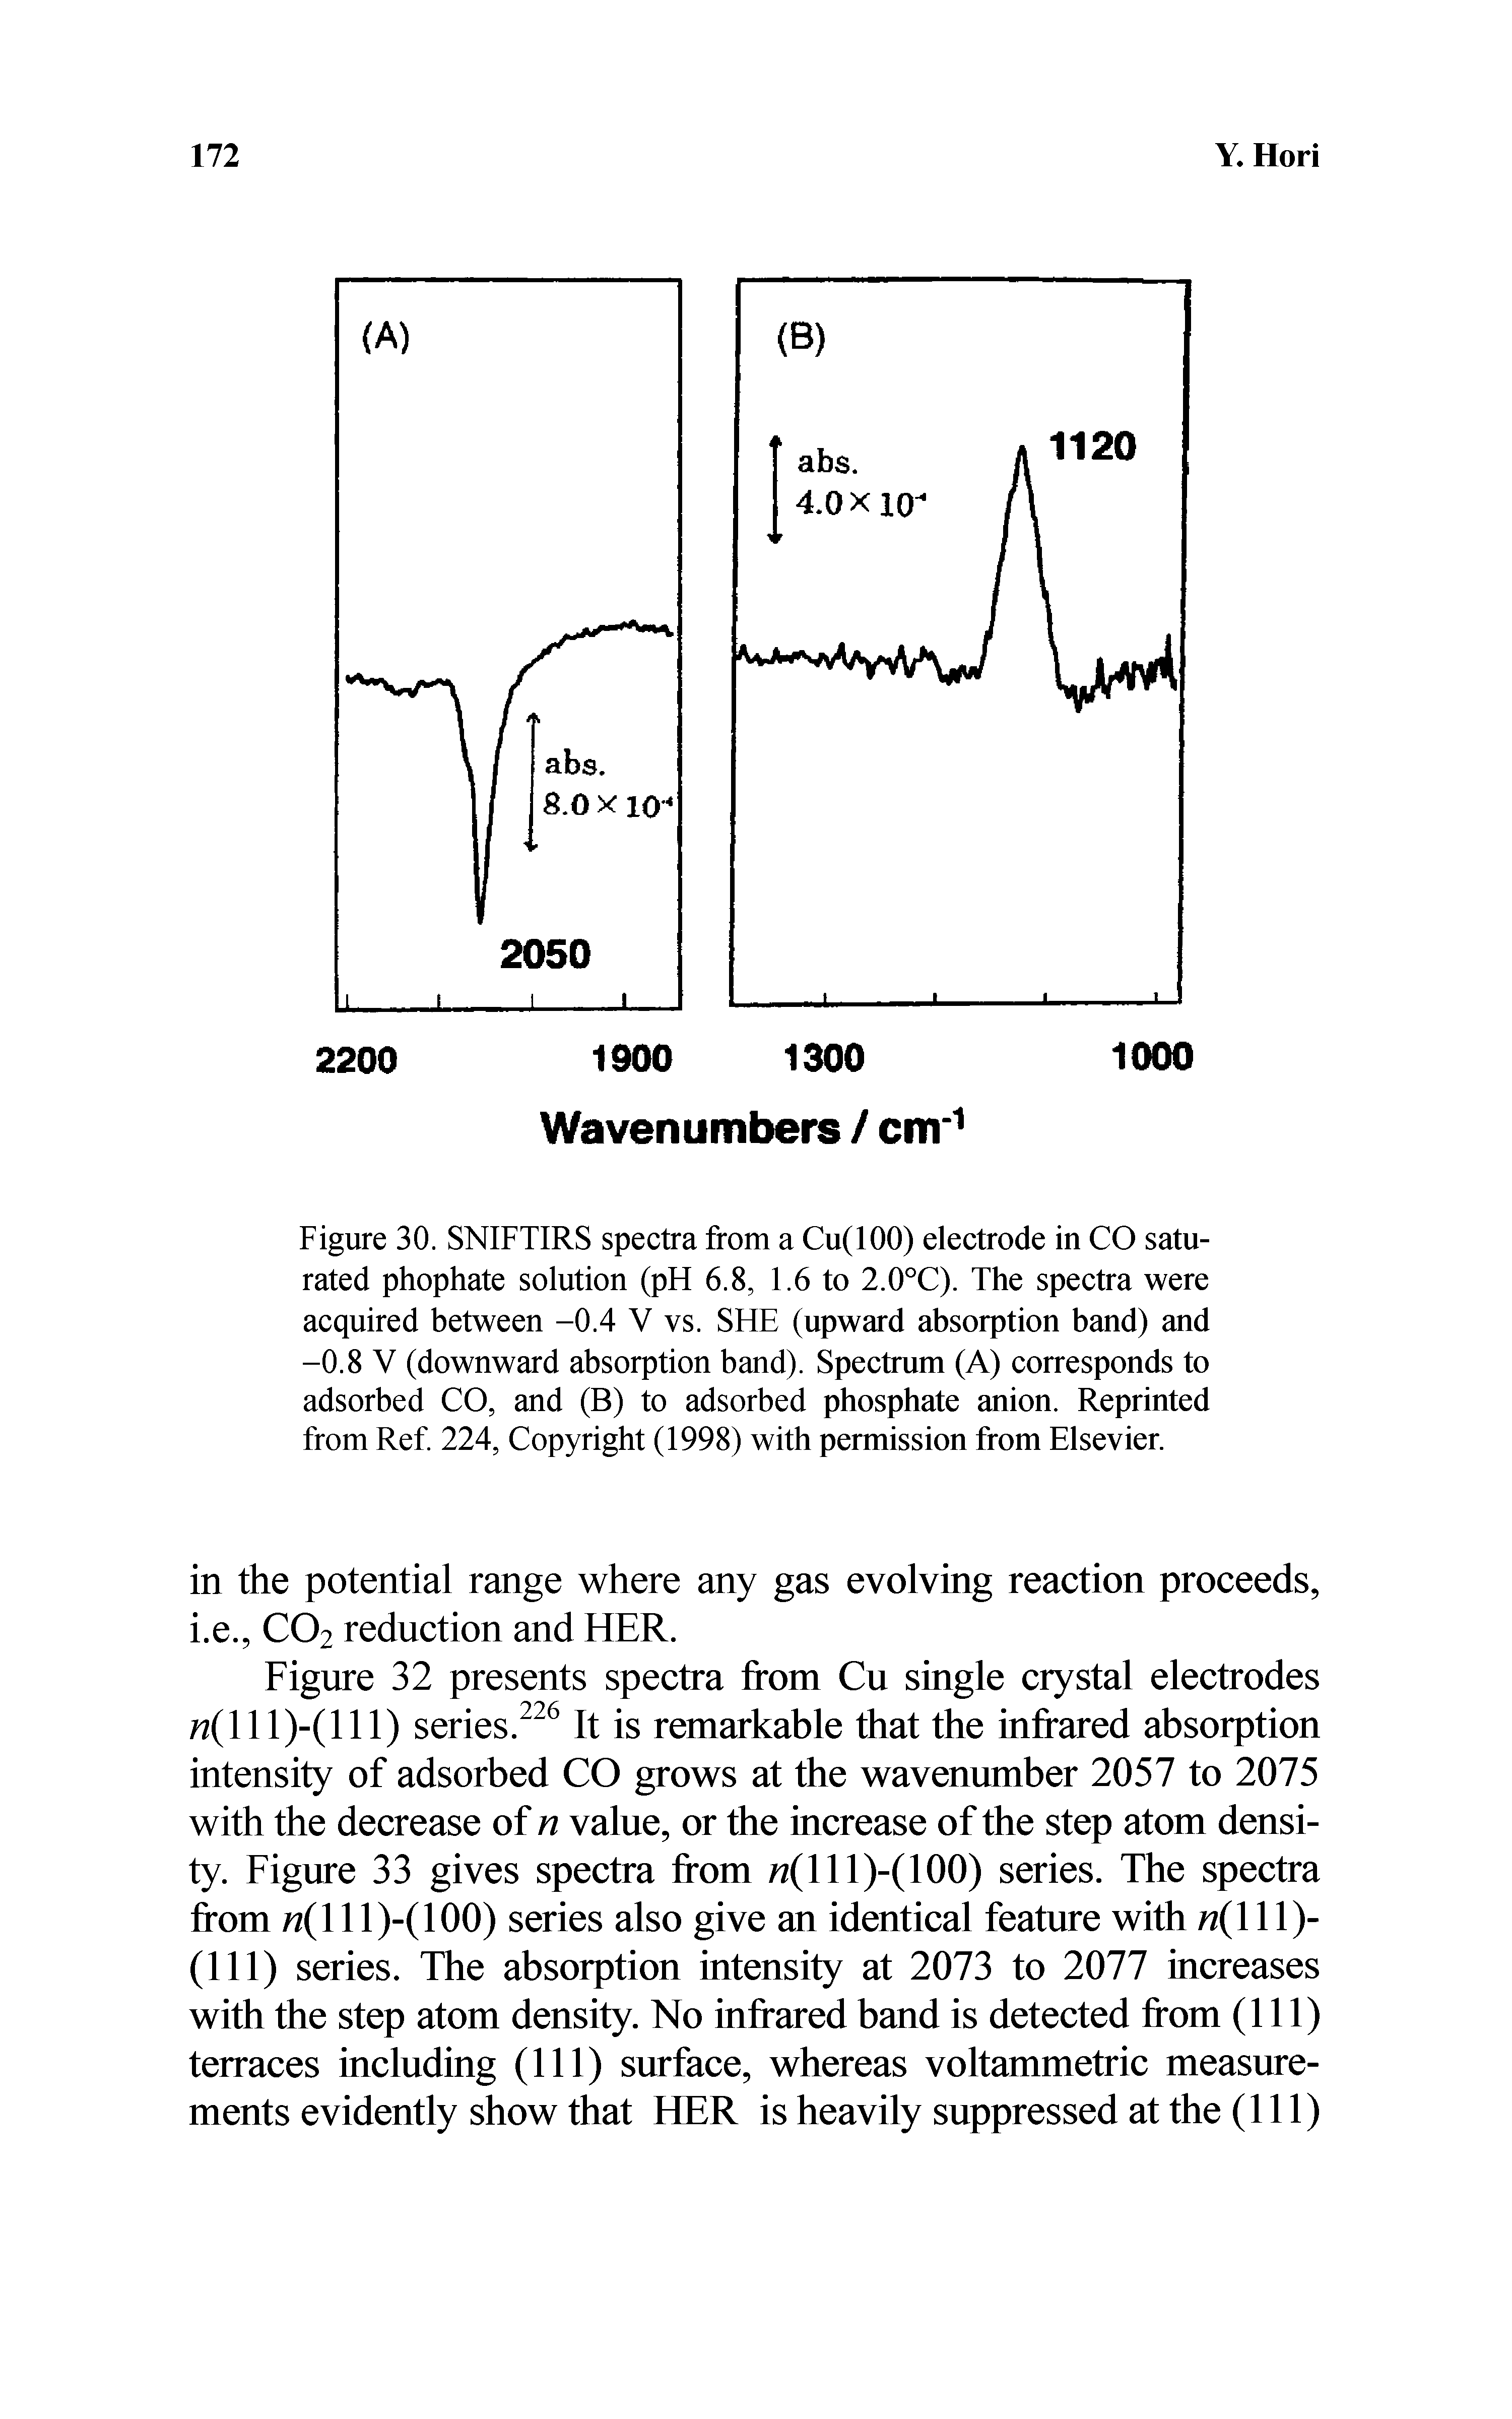 Figure 30. SNIFTIRS spectra from a Cu(lOO) electrode in CO saturated phophate solution (pH 6.8, 1.6 to 2.0°C). The spectra were acquired between -0.4 V vs. SHE (upward absorption band) and -0.8 V (downward absorption band). Spectrum (A) corresponds to adsorbed CO, and (B) to adsorbed phosphate anion. Reprinted from Ref. 224, Copyright (1998) with permission from Elsevier.